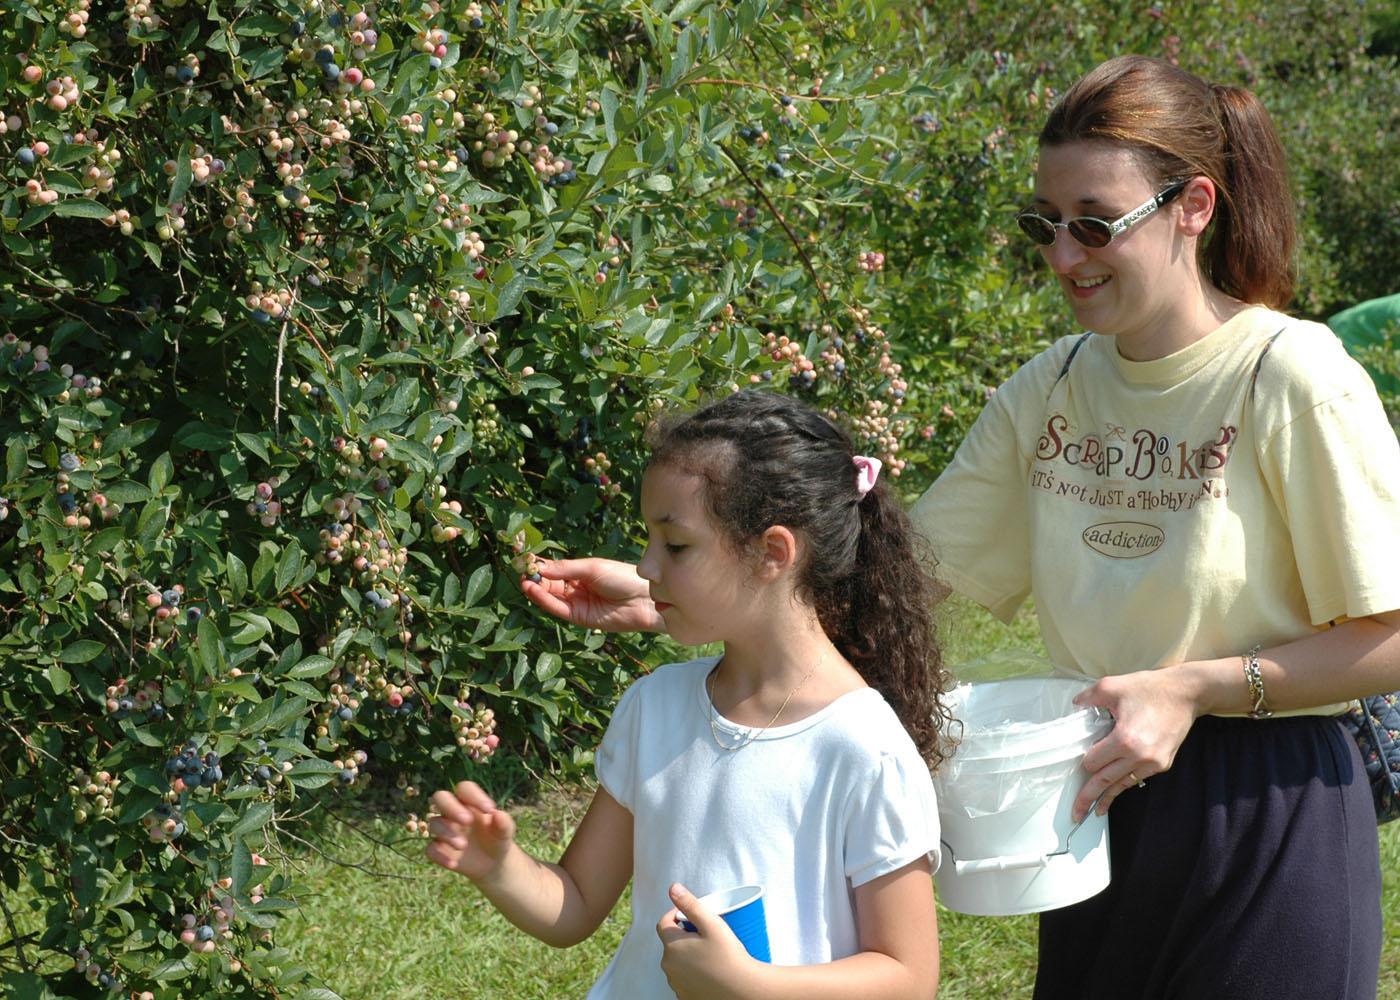 Tina Cox of West Point picks blueberries with her daughter, Anna, 7, at Reese Orchard in Sessums. The pick-your-own method of selling blueberries is increasing in popularity, allowing consumers a fresh product they can choose themselves.